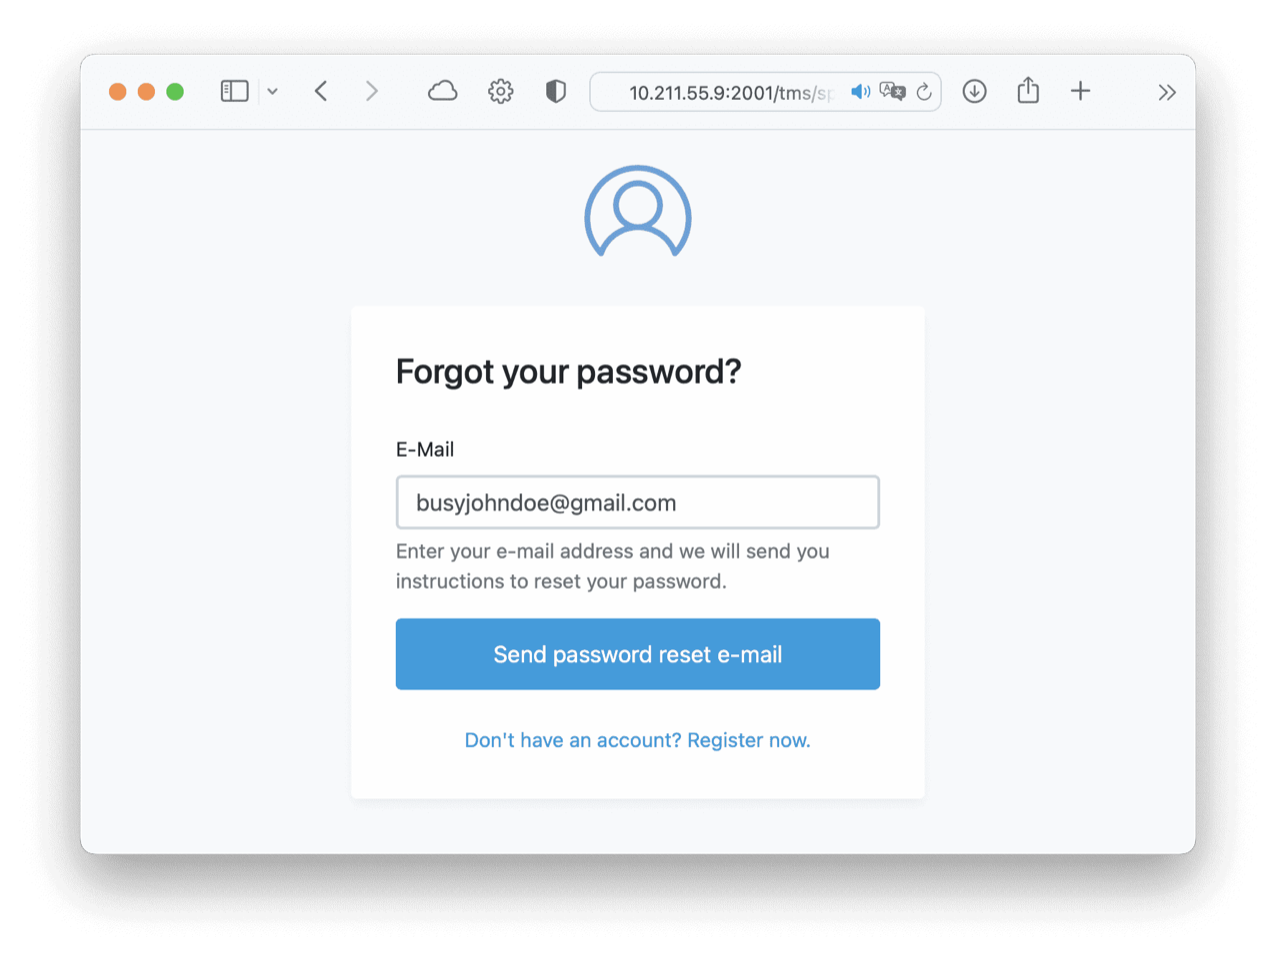 Full-features user interface includes a “forgot password” that allows users to recover the password themselves